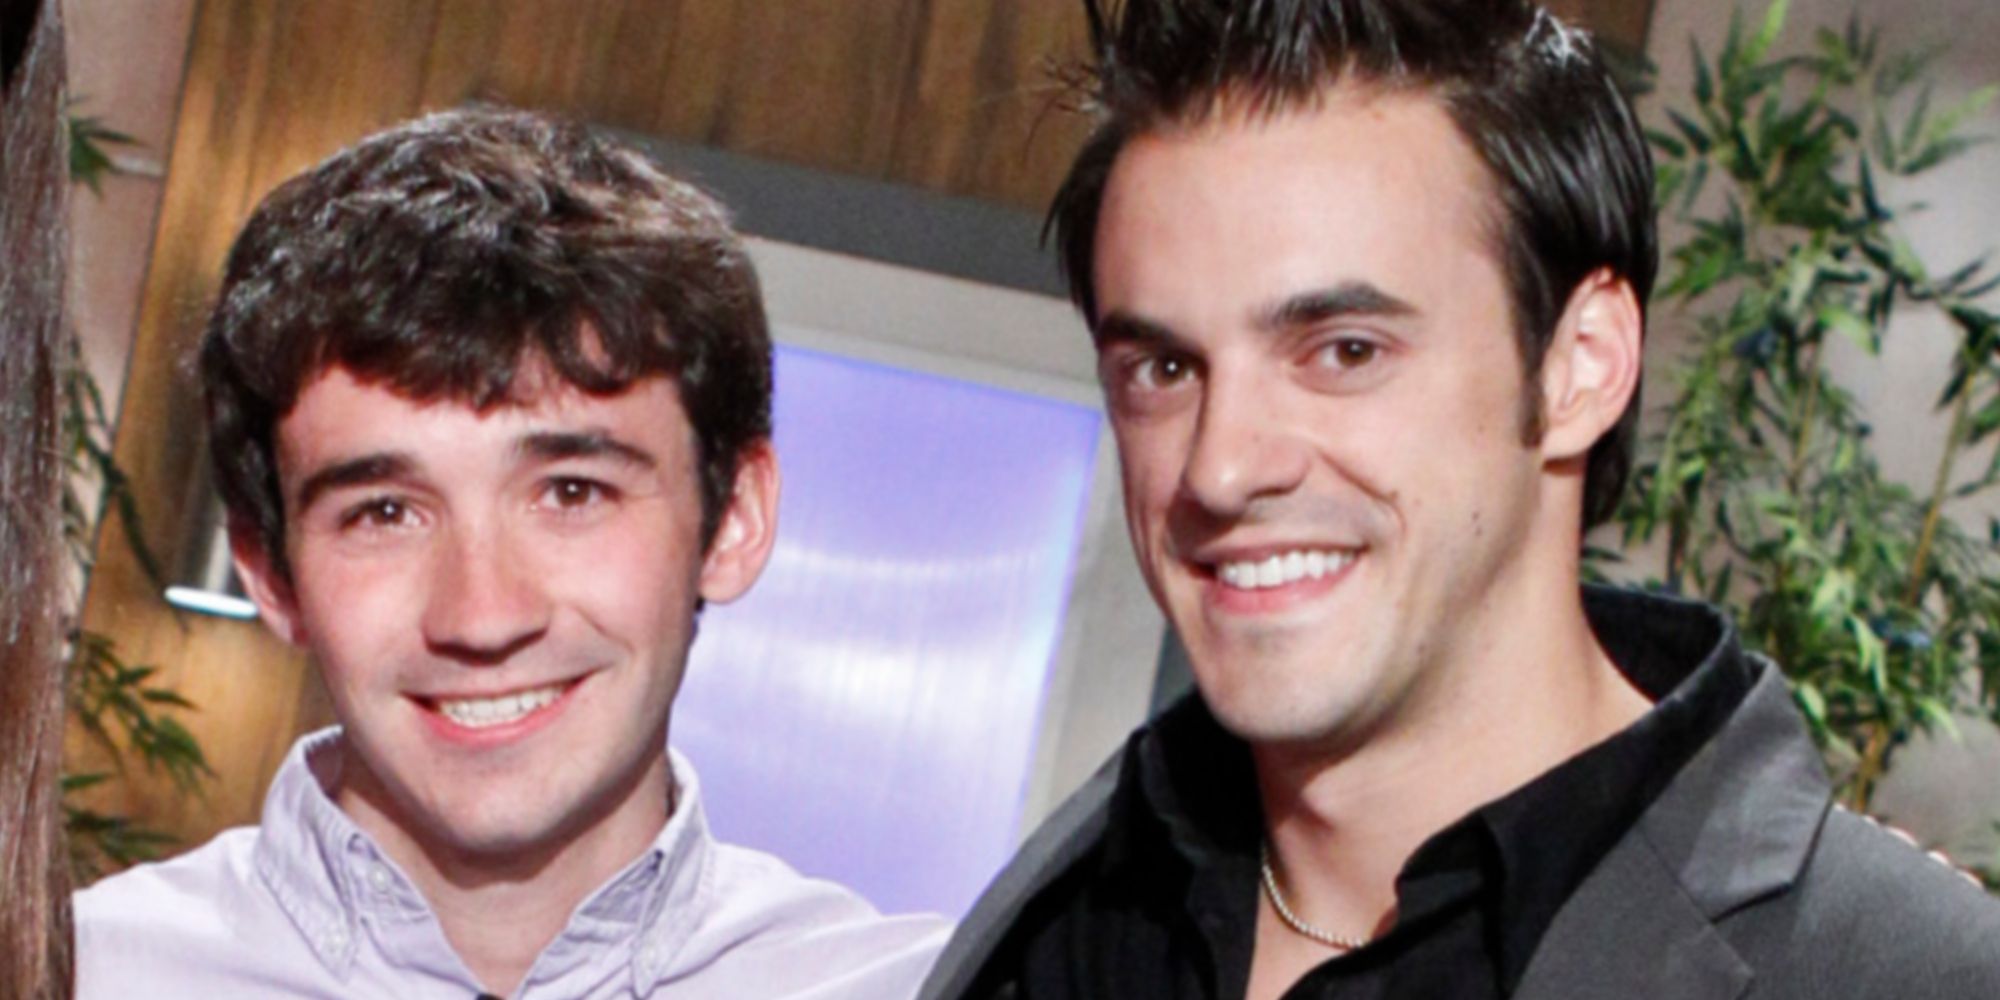 Ian Terry and Dan Gheesling posing together after the Big Brother 14 finale